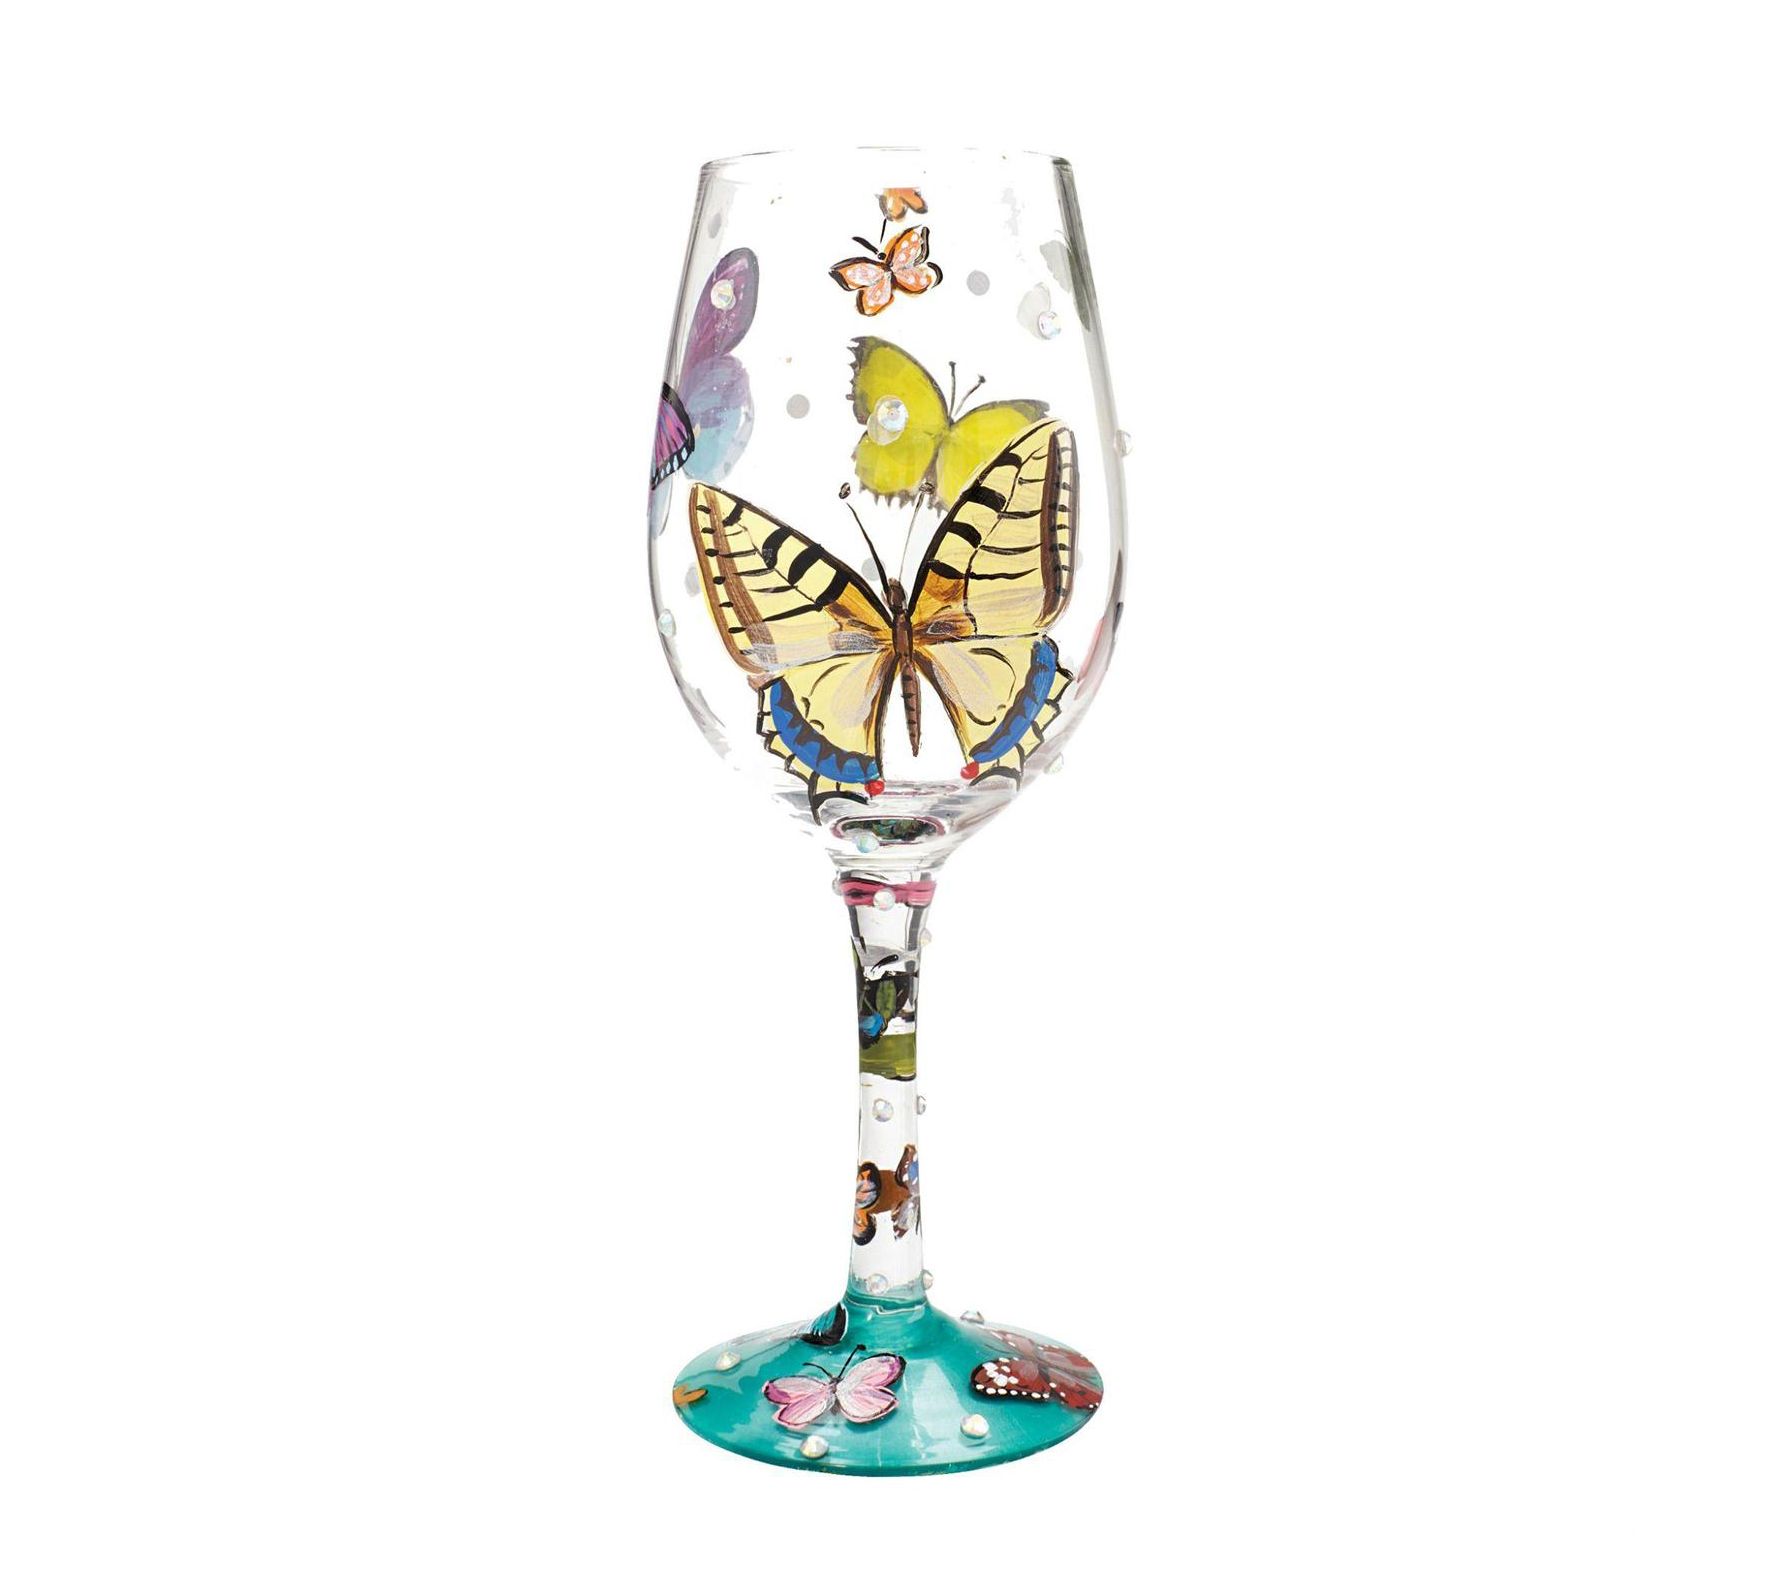 Lolita Mommy's Sippy Cup Acrylic Wine Glass